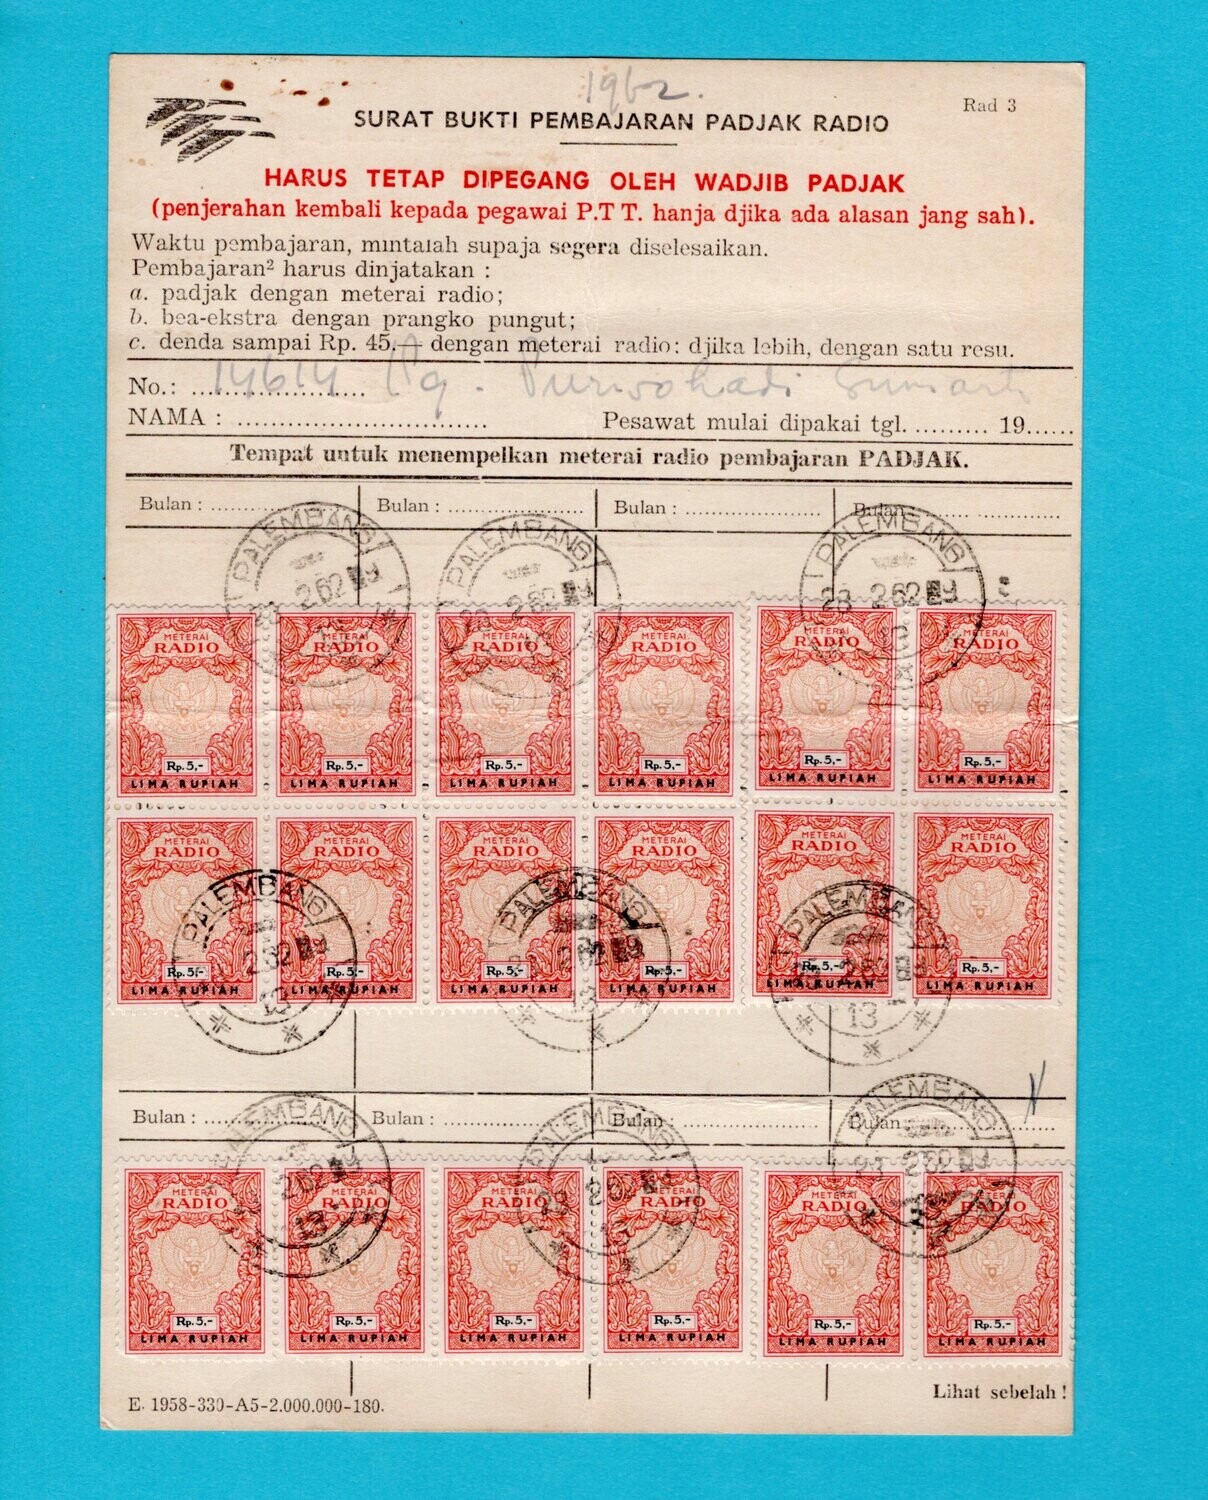 INDONESIA Radio permit 1962 Palembang with special fiscals